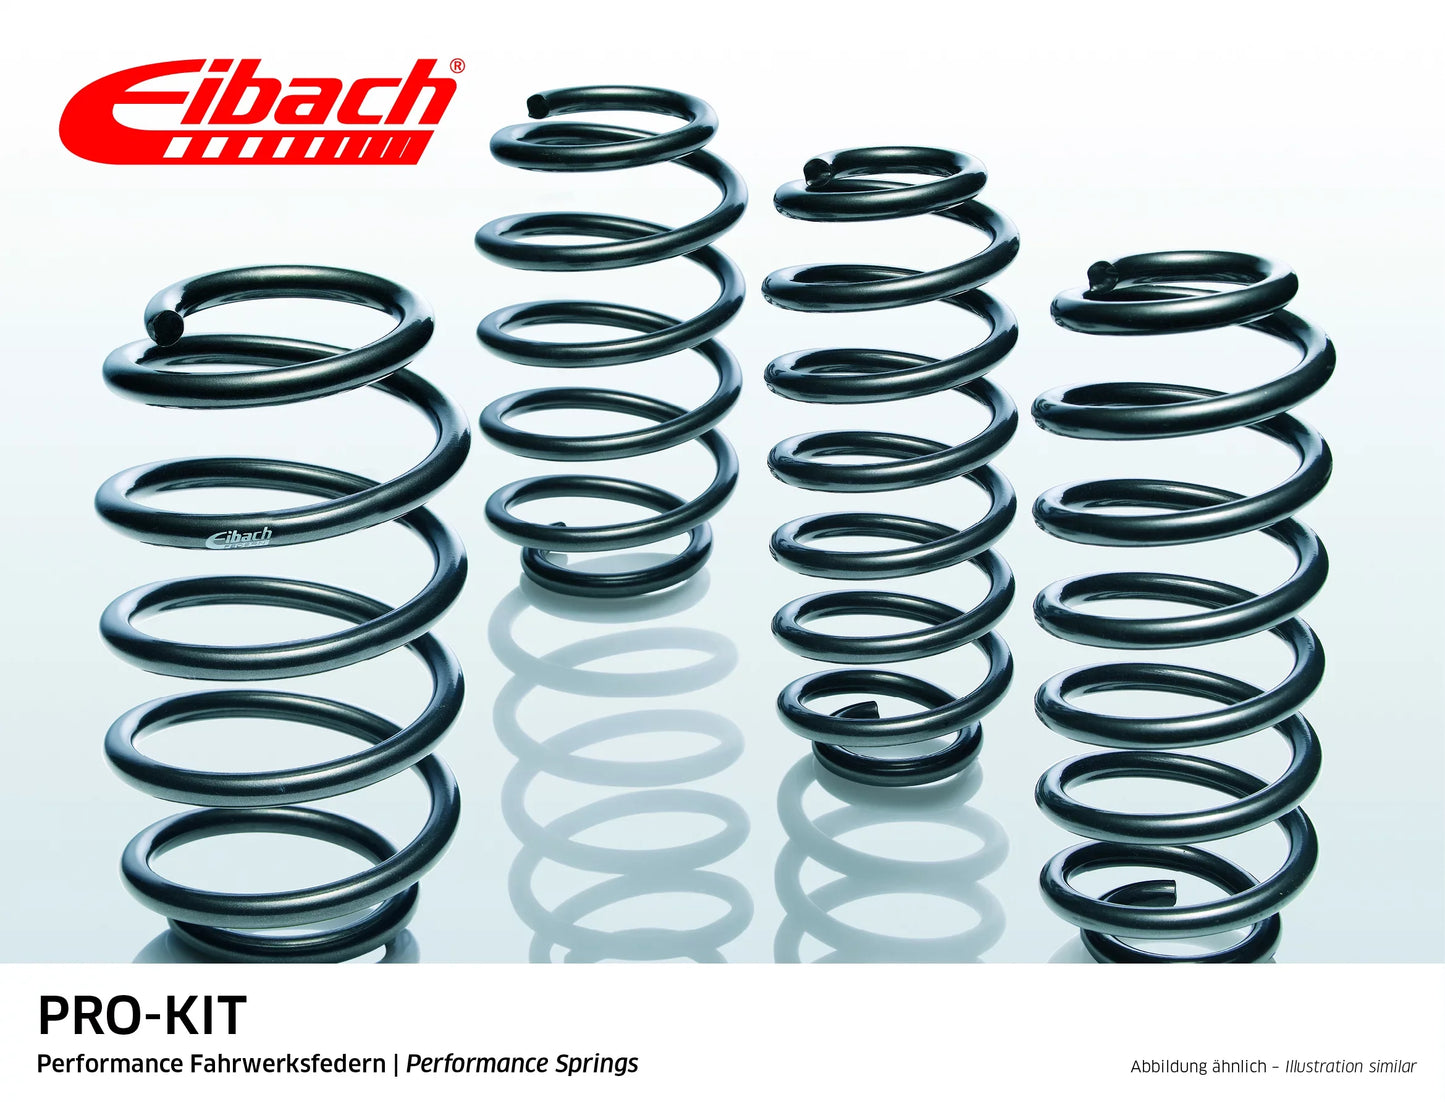 Eibach Pro-Kit Lowering Springs (E10-25-019-04-22) at £263.02